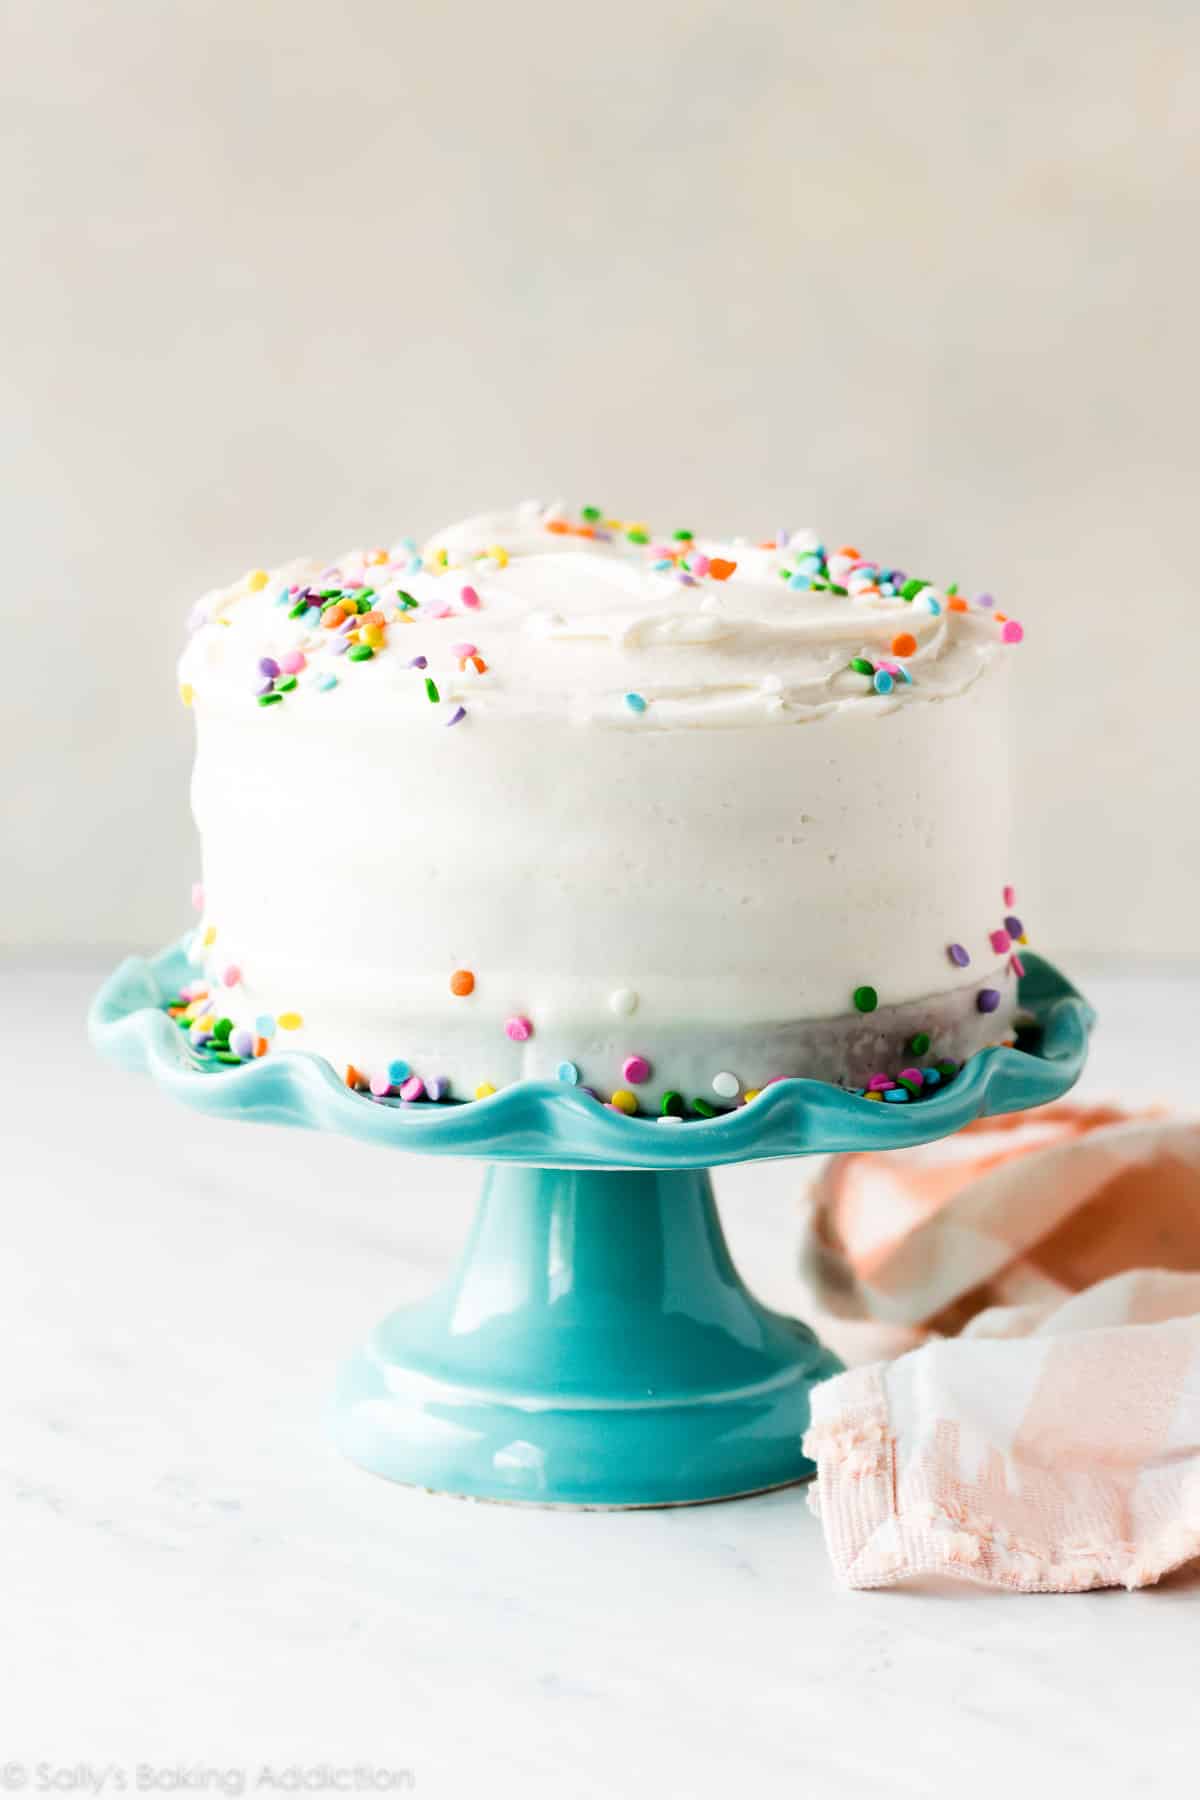 6 inch vanilla cake with sprinkles on a teal cake stand